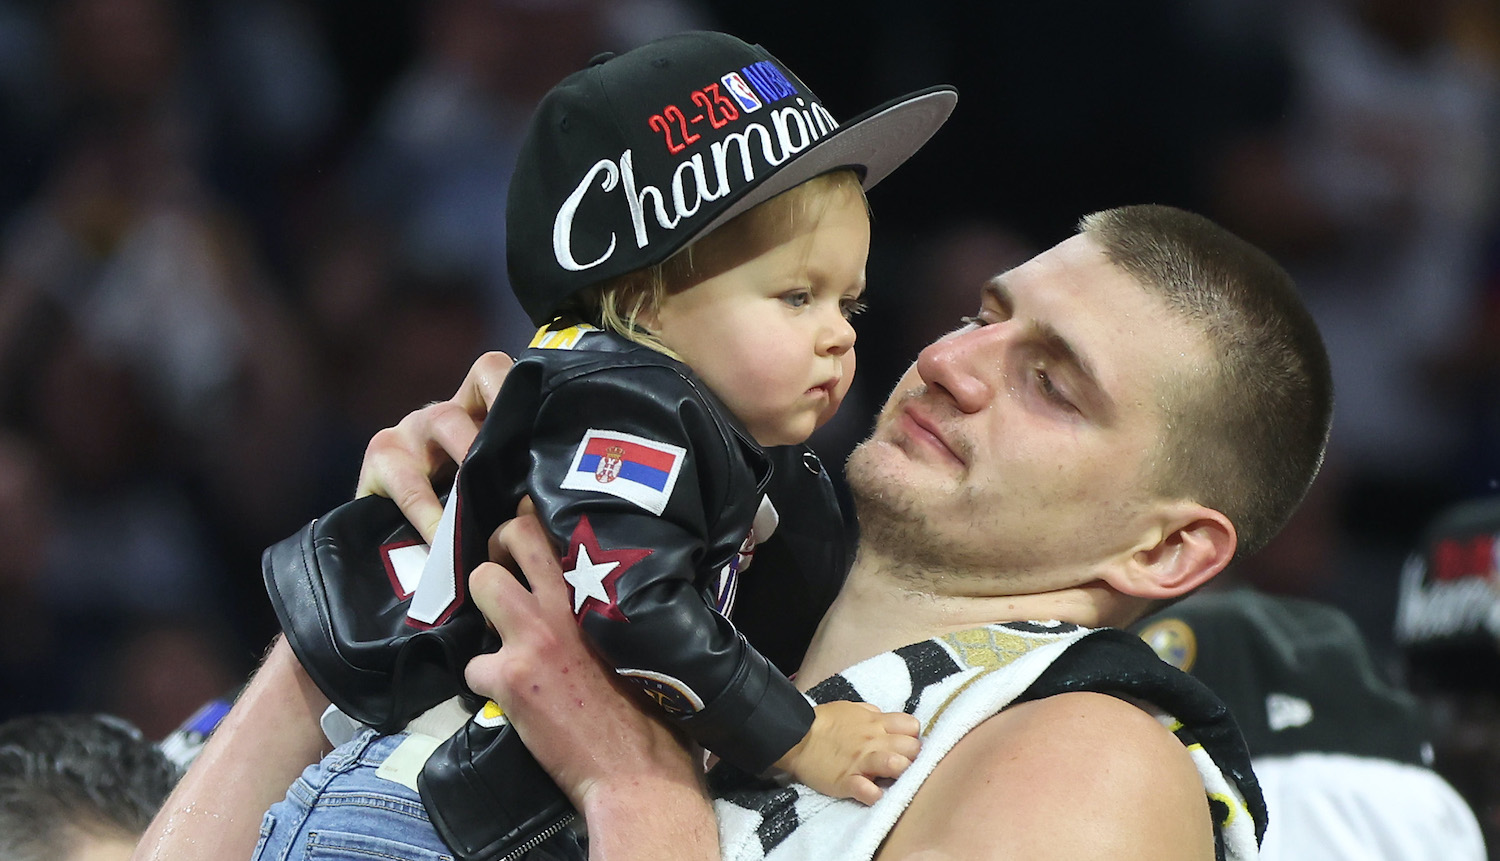 DENVER, COLORADO - JUNE 12: (EDITORS NOTE: Retransmission with alternate crop.) Nikola Jokic #15 of the Denver Nuggets celebrates with his daughter Ognjena after a 94-89 victory against the Miami Heat in Game Five of the 2023 NBA Finals to win the NBA Championship at Ball Arena on June 12, 2023 in Denver, Colorado. NOTE TO USER: User expressly acknowledges and agrees that, by downloading and or using this photograph, User is consenting to the terms and conditions of the Getty Images License Agreement. (Photo by Matthew Stockman/Getty Images)